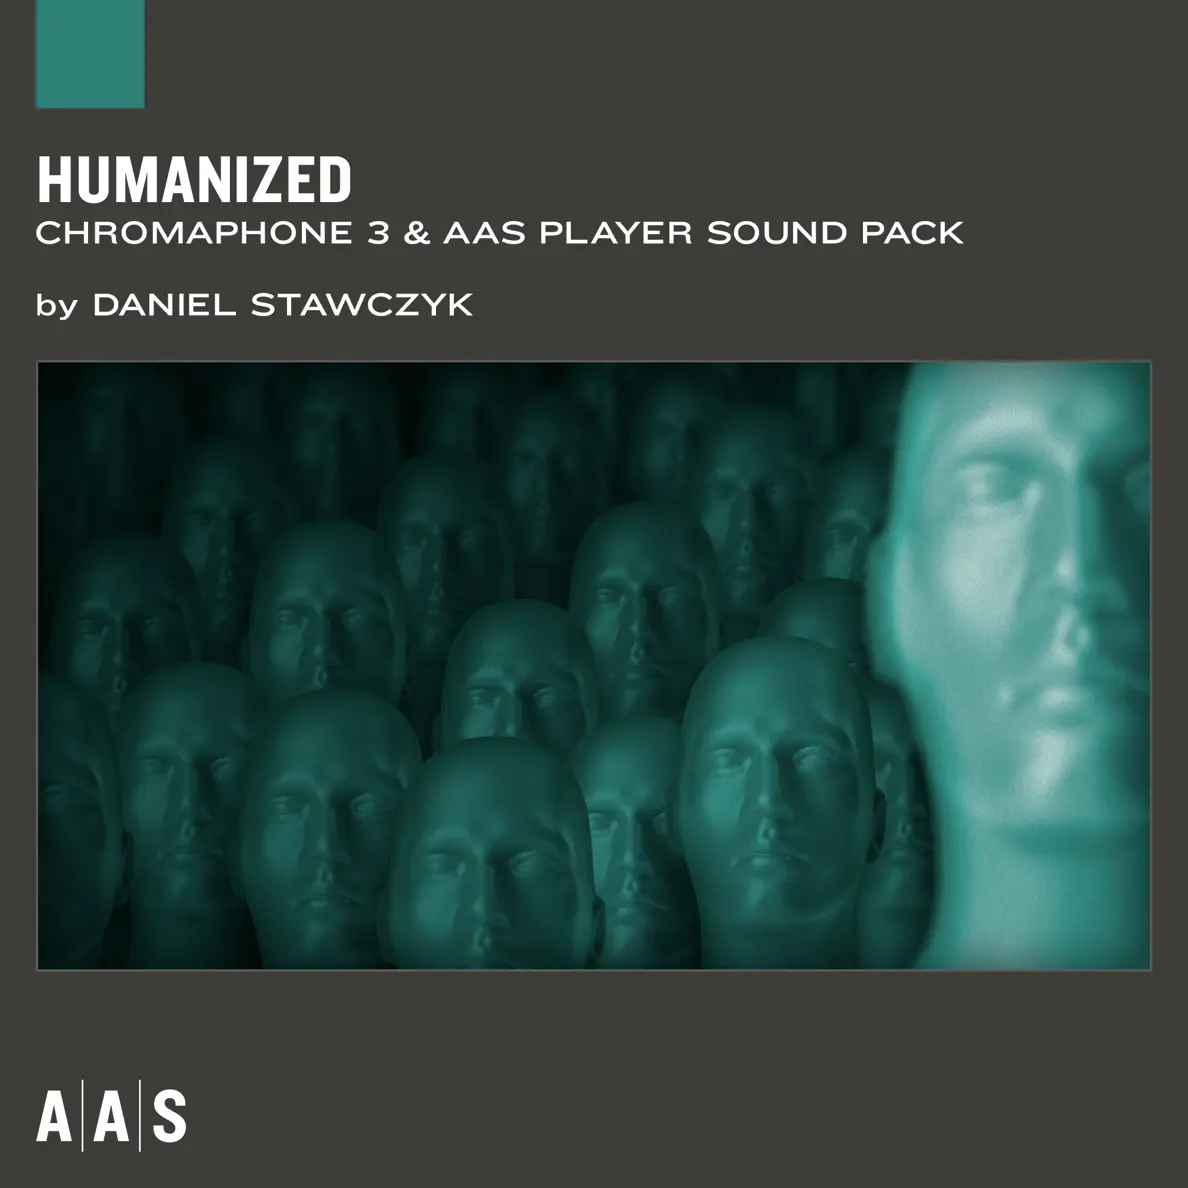 Chromaphone and AAS Player sound pack ： Humanized